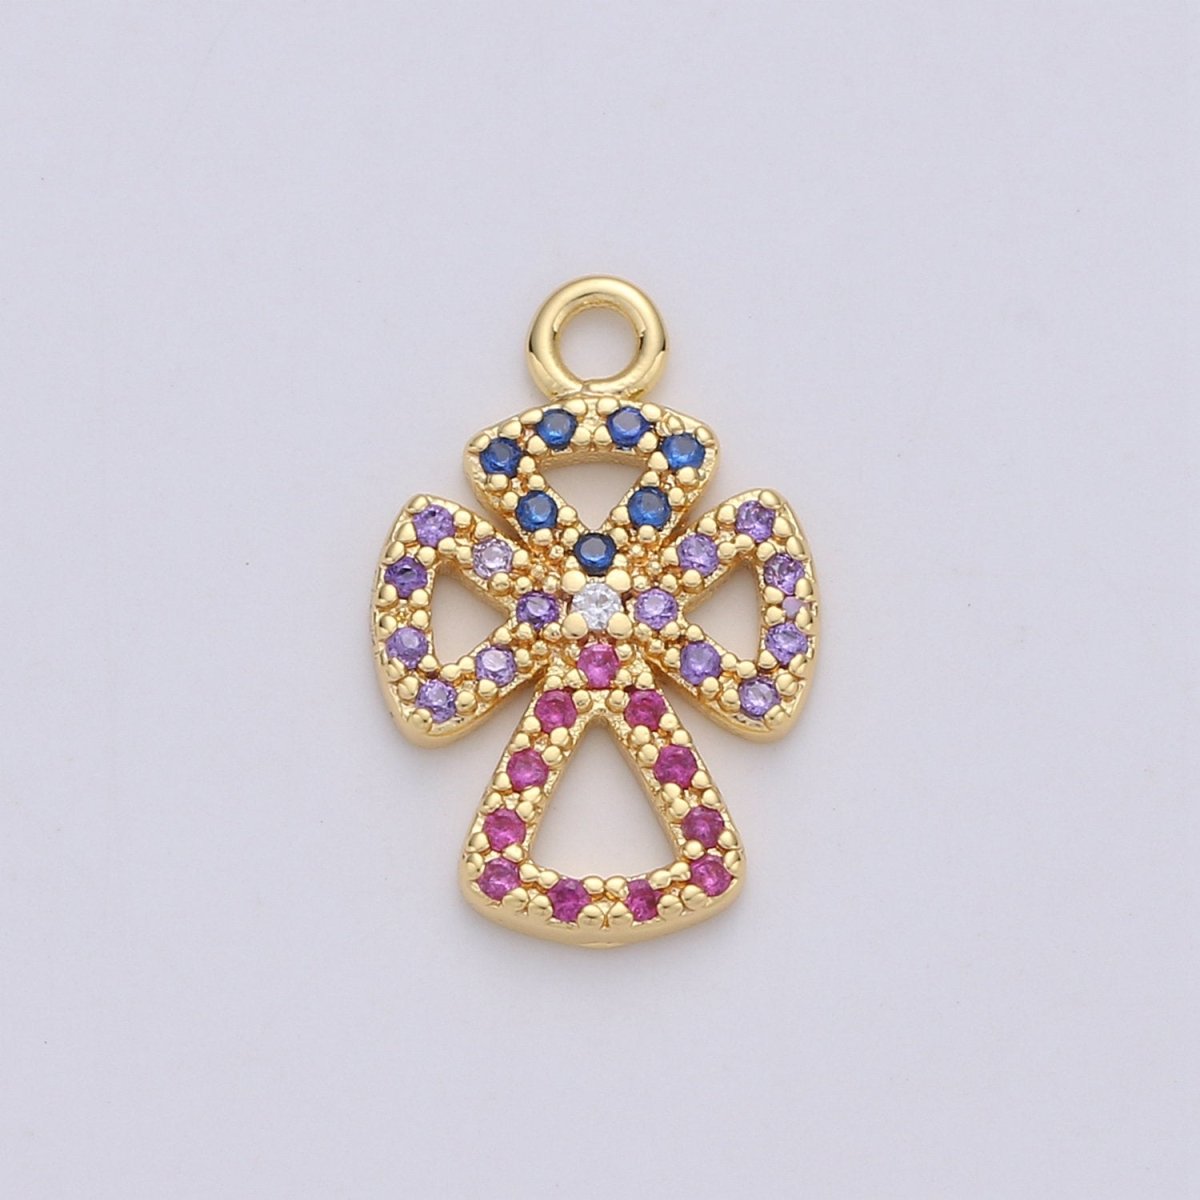 Dainty Gold Cross Charm Micro Pave Cross Charm Cubic Multi Color CZ Cross charm for Bracelet earring Necklace Component Supply C-882 - DLUXCA